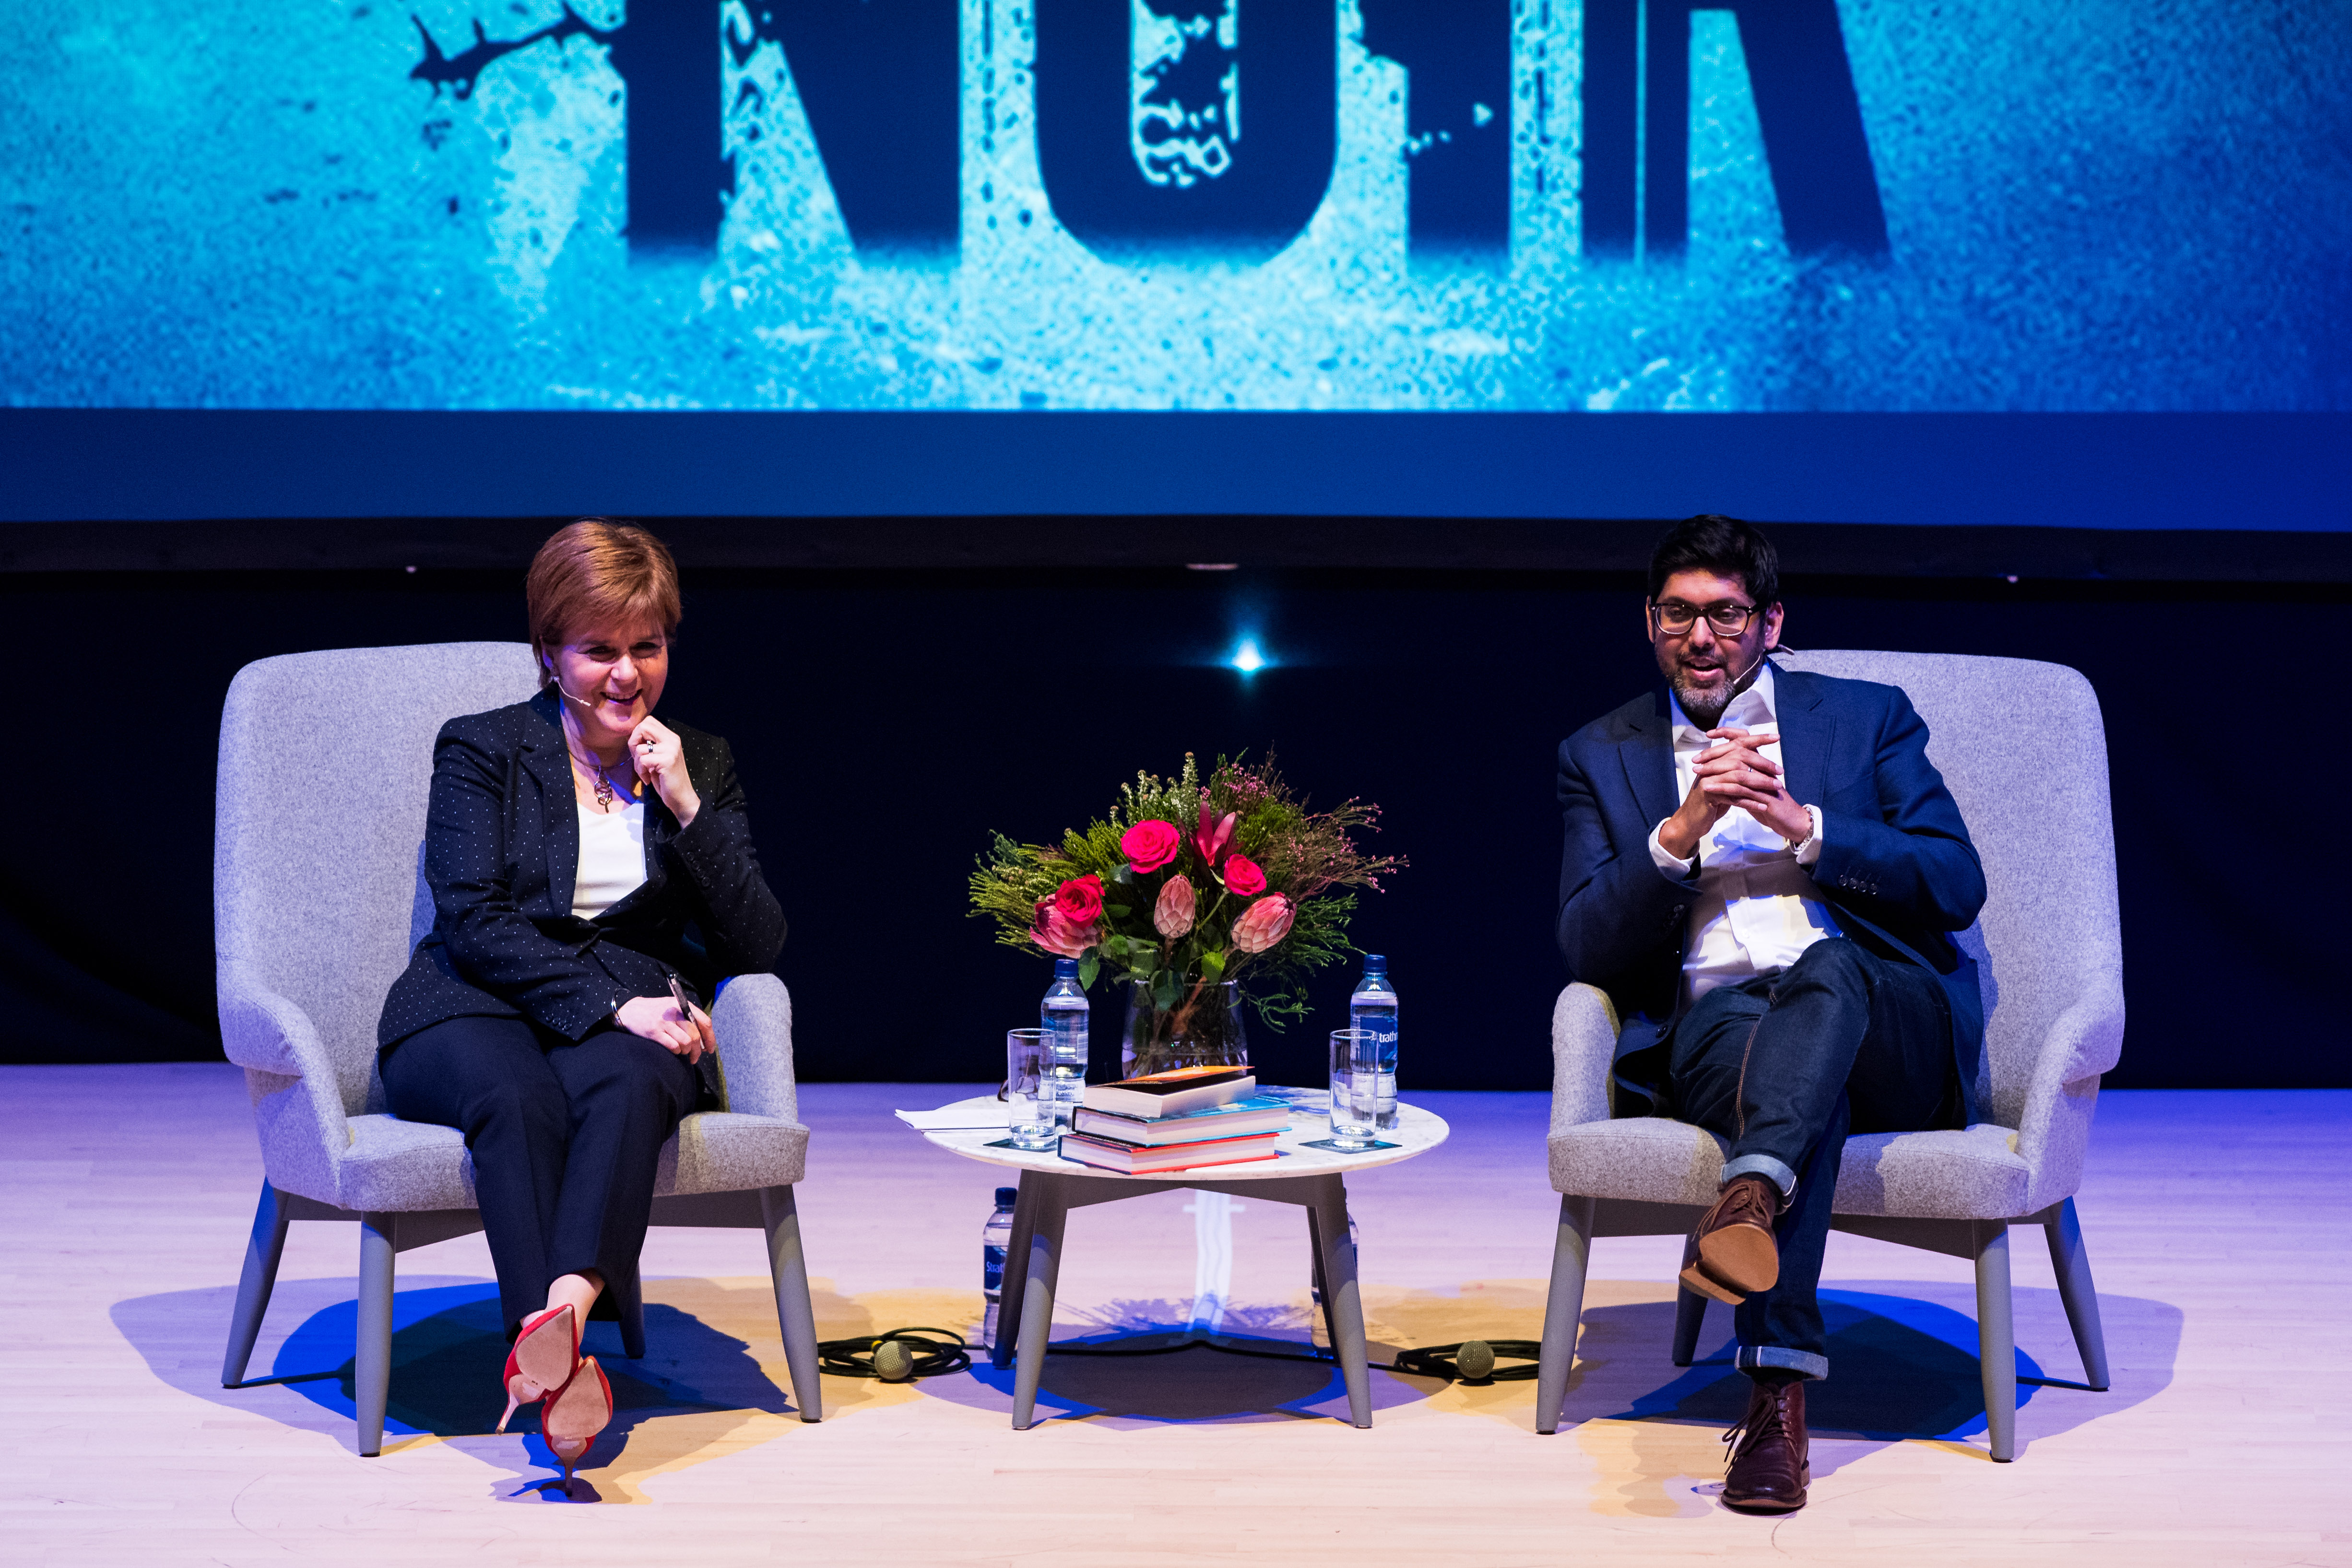 Granite Noir 2019. Friday 22nd events and authors. First Minister Nicola Sturgeon and Abir Mukherjee at The Music Hall.